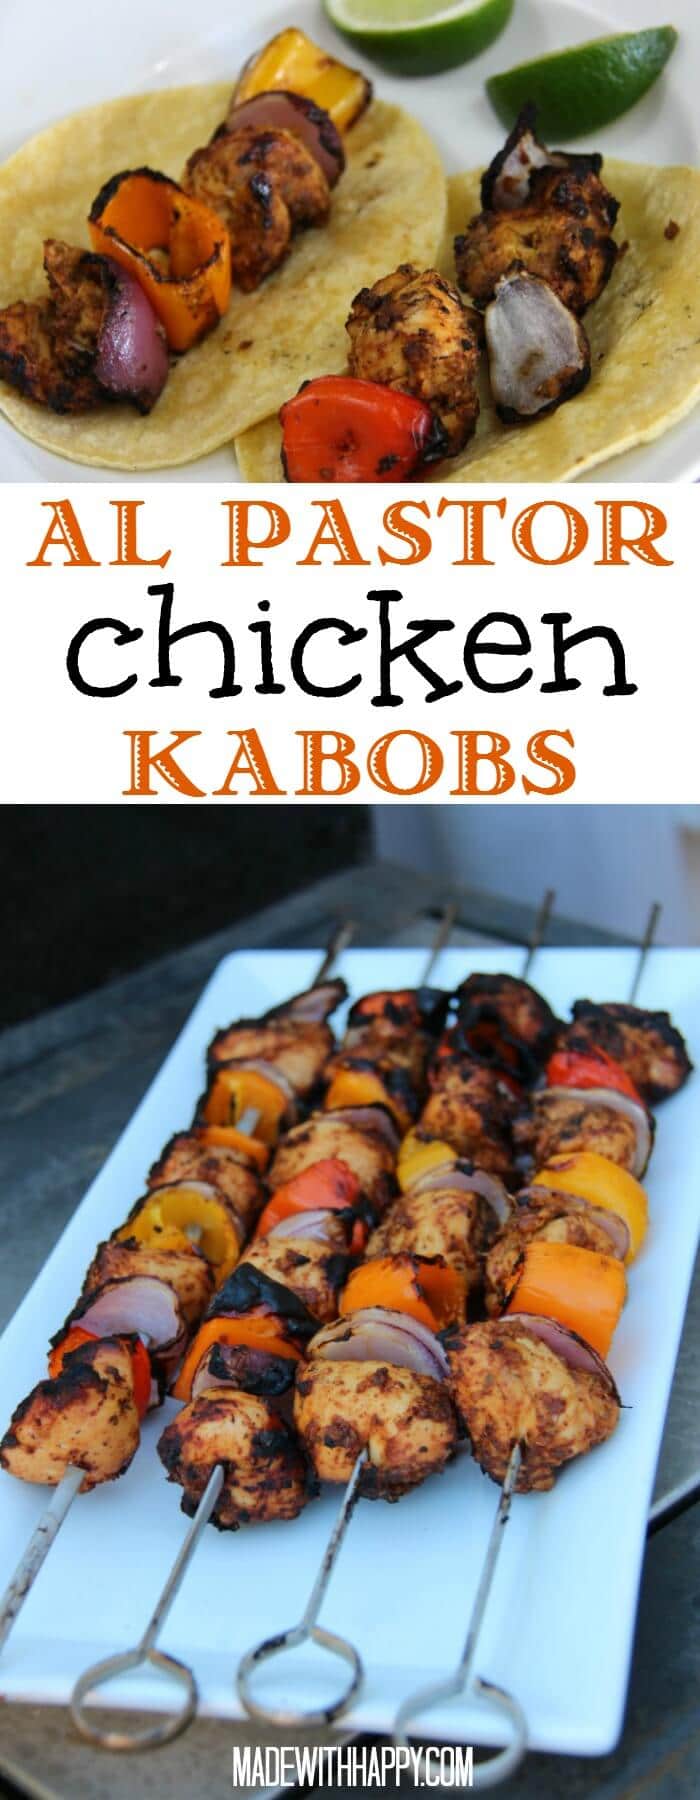 Al Pastor Chicken Kabobs | Chicken Skewers for the Grill | Mexican Marinaded Chicken| Al Pastor is a typical Mexican pork dish, but our spin is the marinade on chicken. Great on the grill and served in tacos. www.madewithHAPPY.com